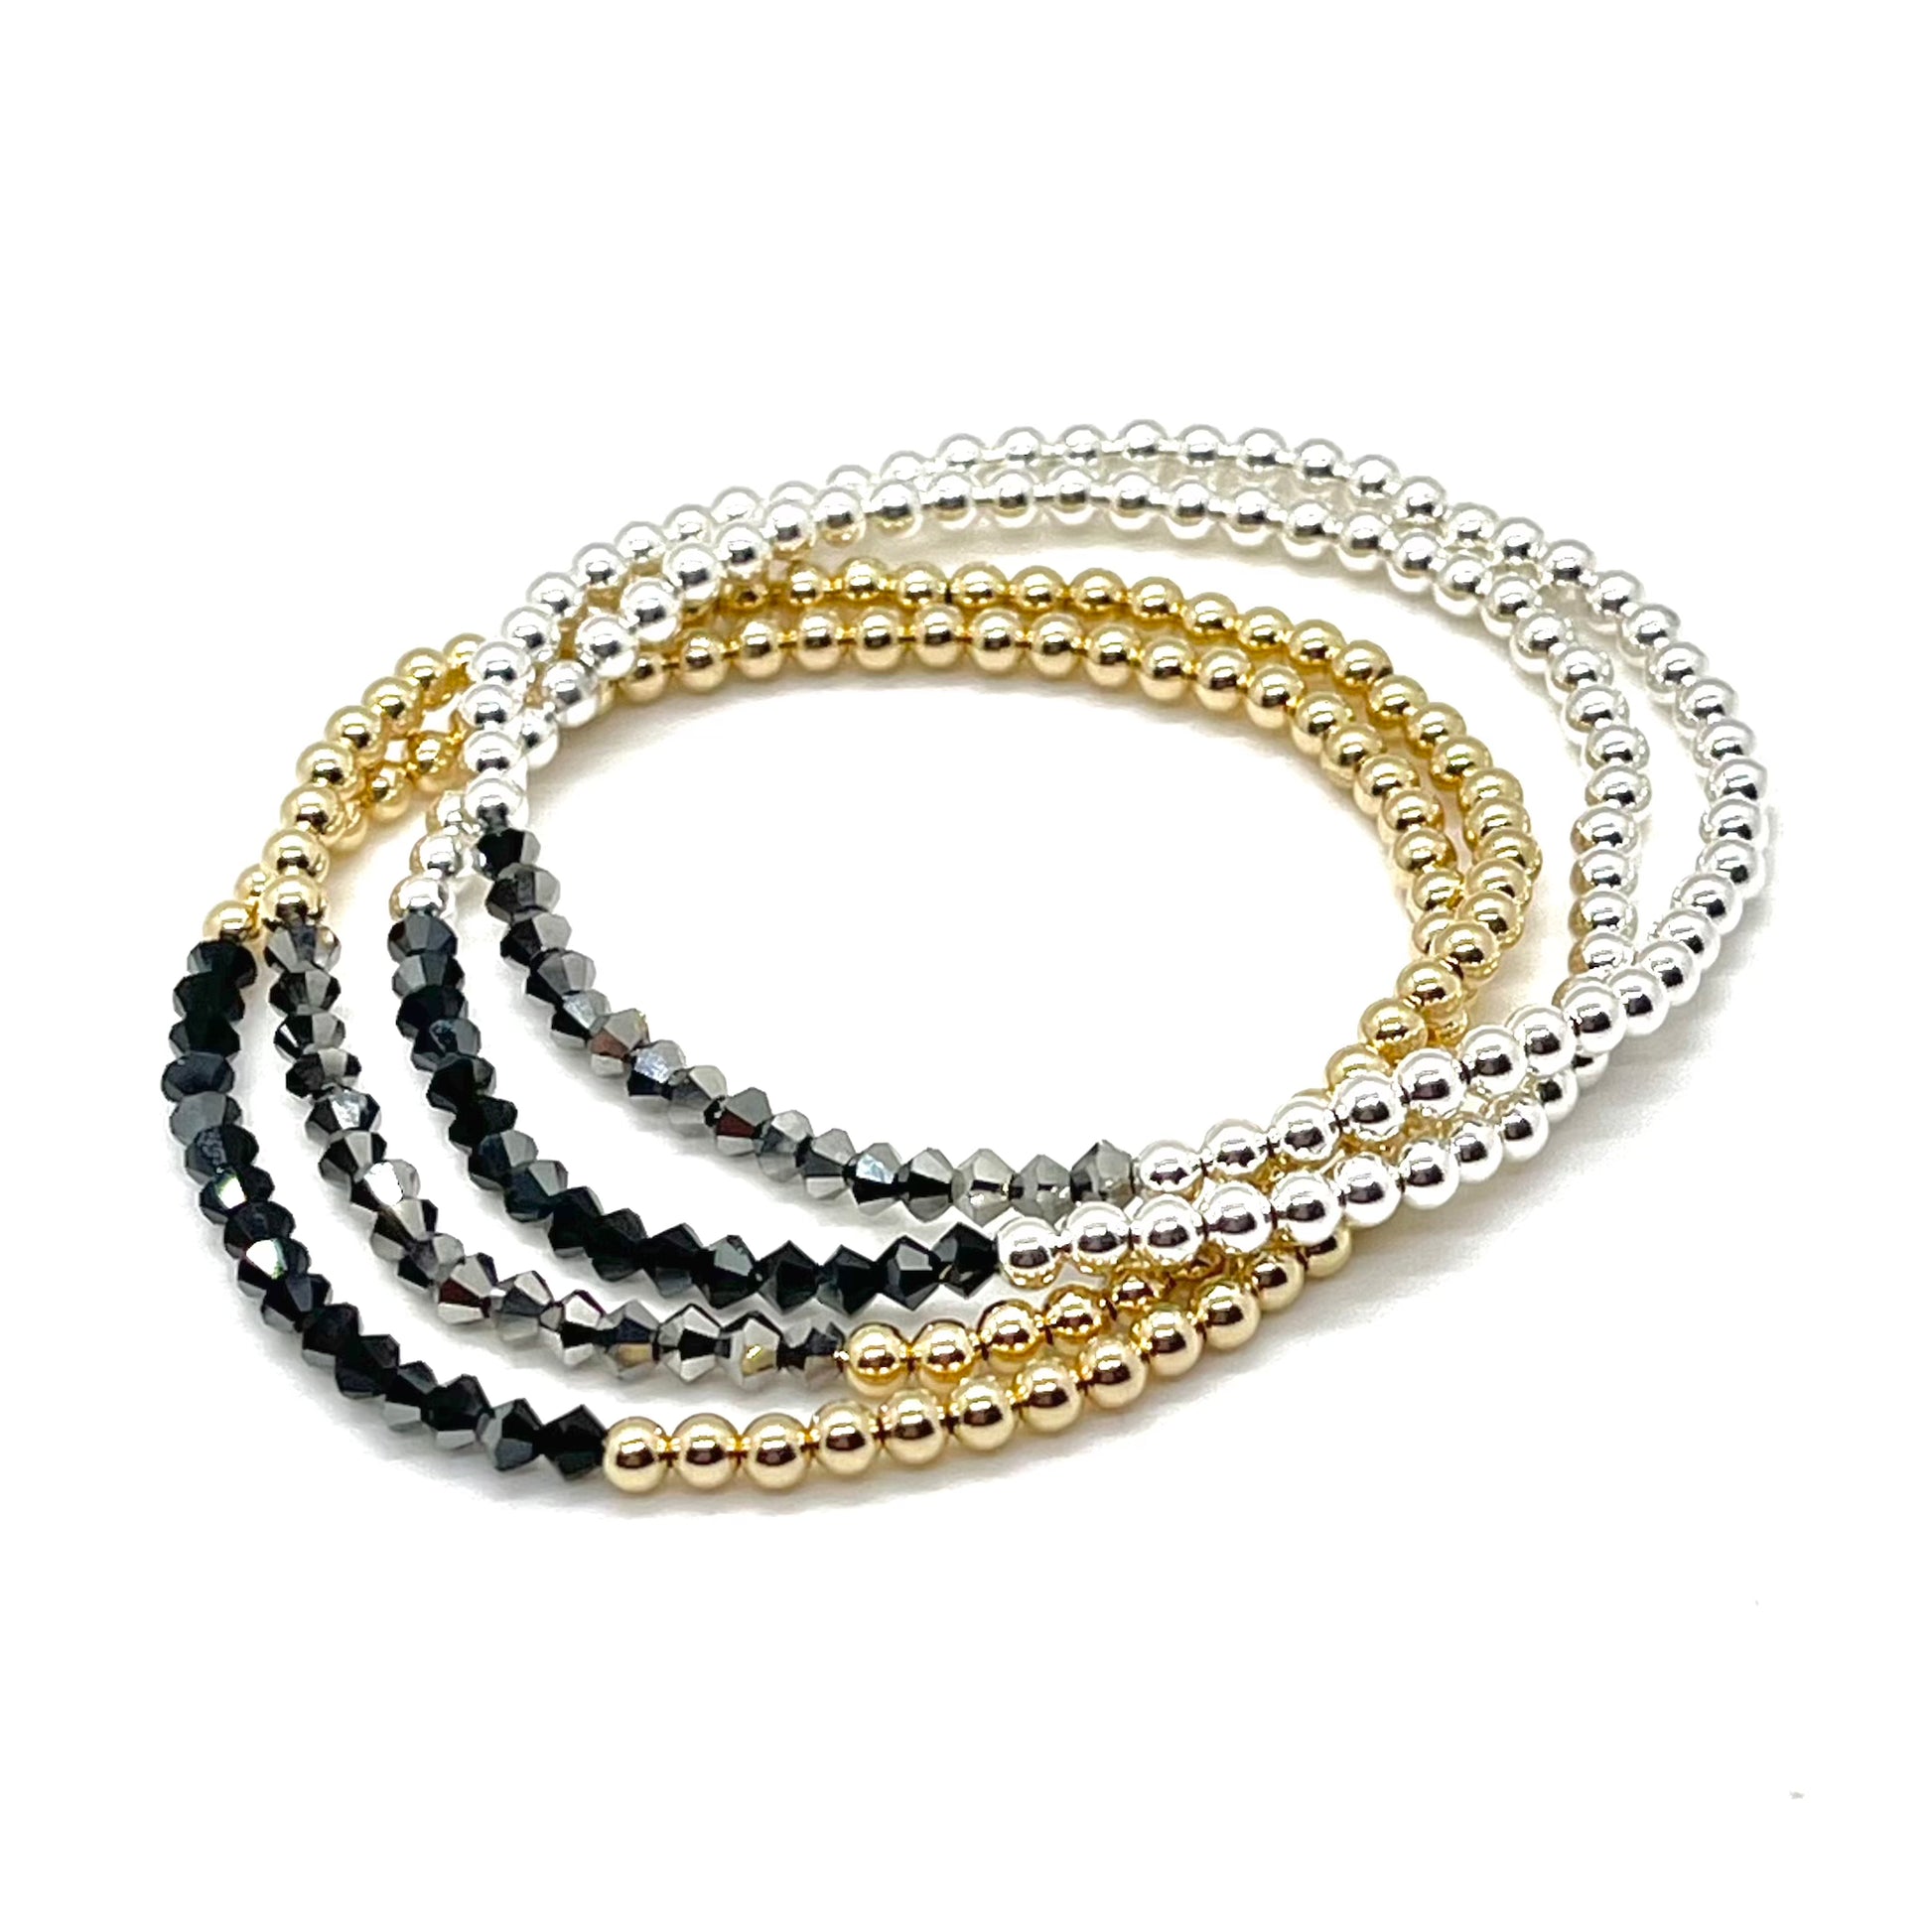 Gold and silver crystal bracelets with black and hematite cut glass crystals on stretch cord.